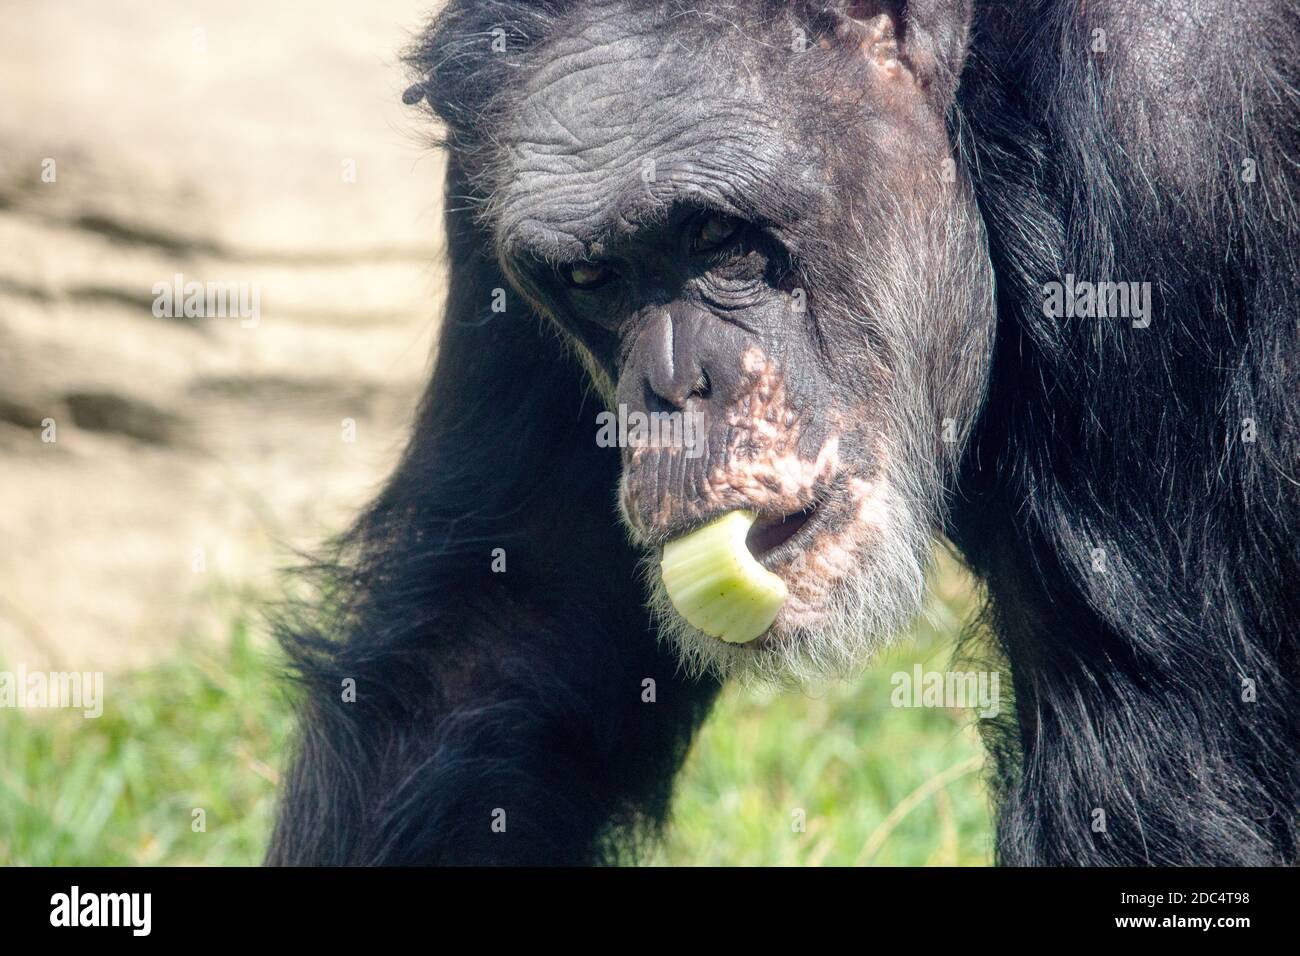 Portrait photo of an adult chimpanzee with vegetables in its mouth Stock Photo